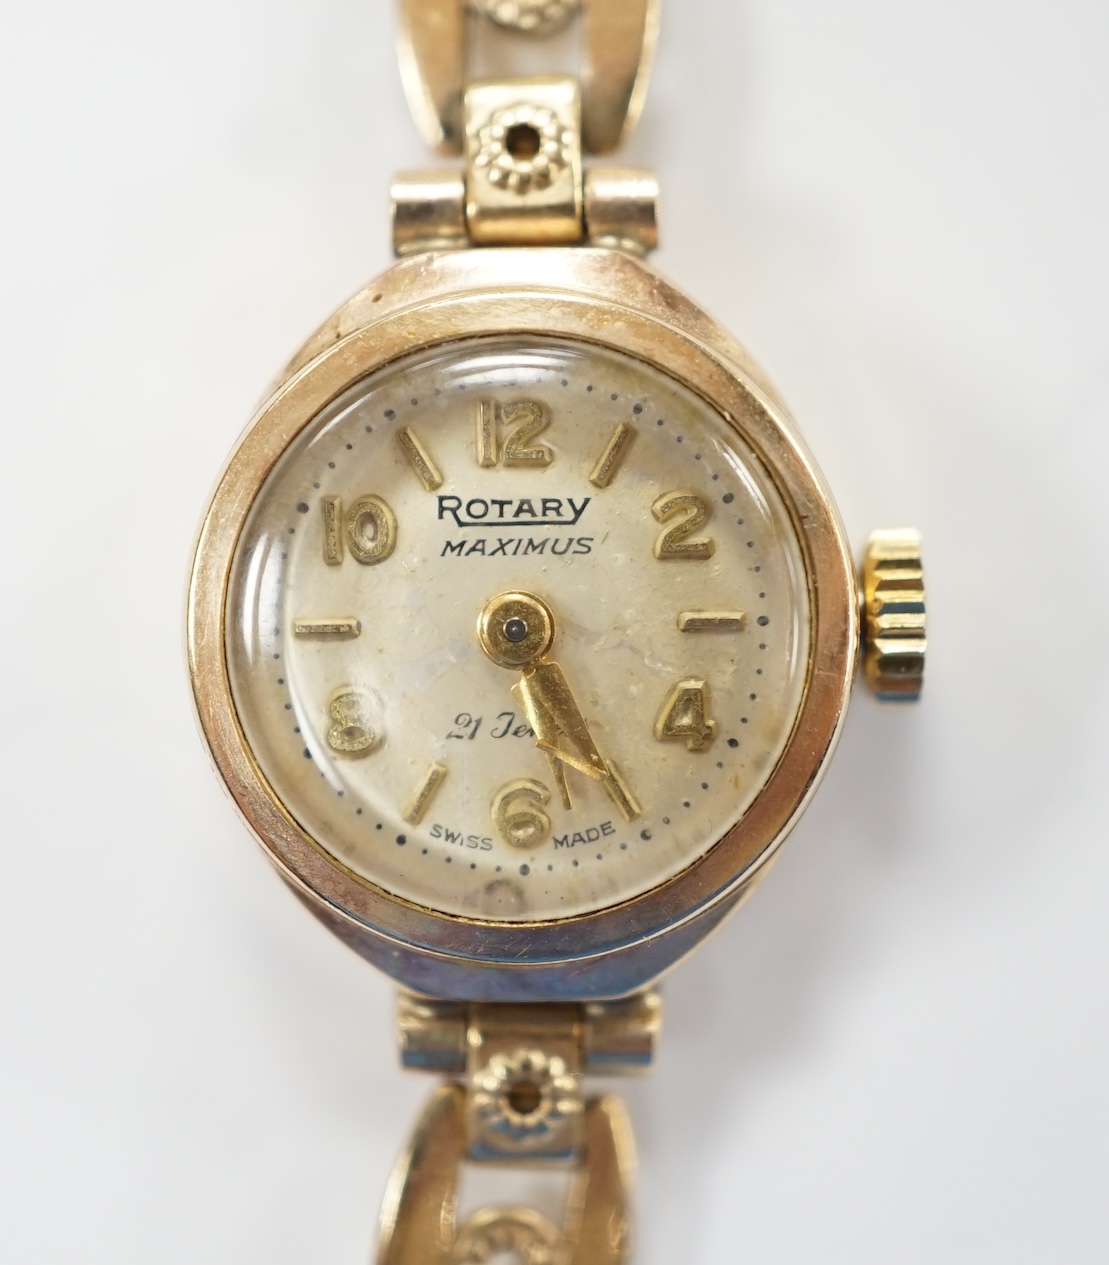 A lady's 9ct gold Rotary Maximus manual wind wrist watch, on a rolled gold bracelet. Condition - fair